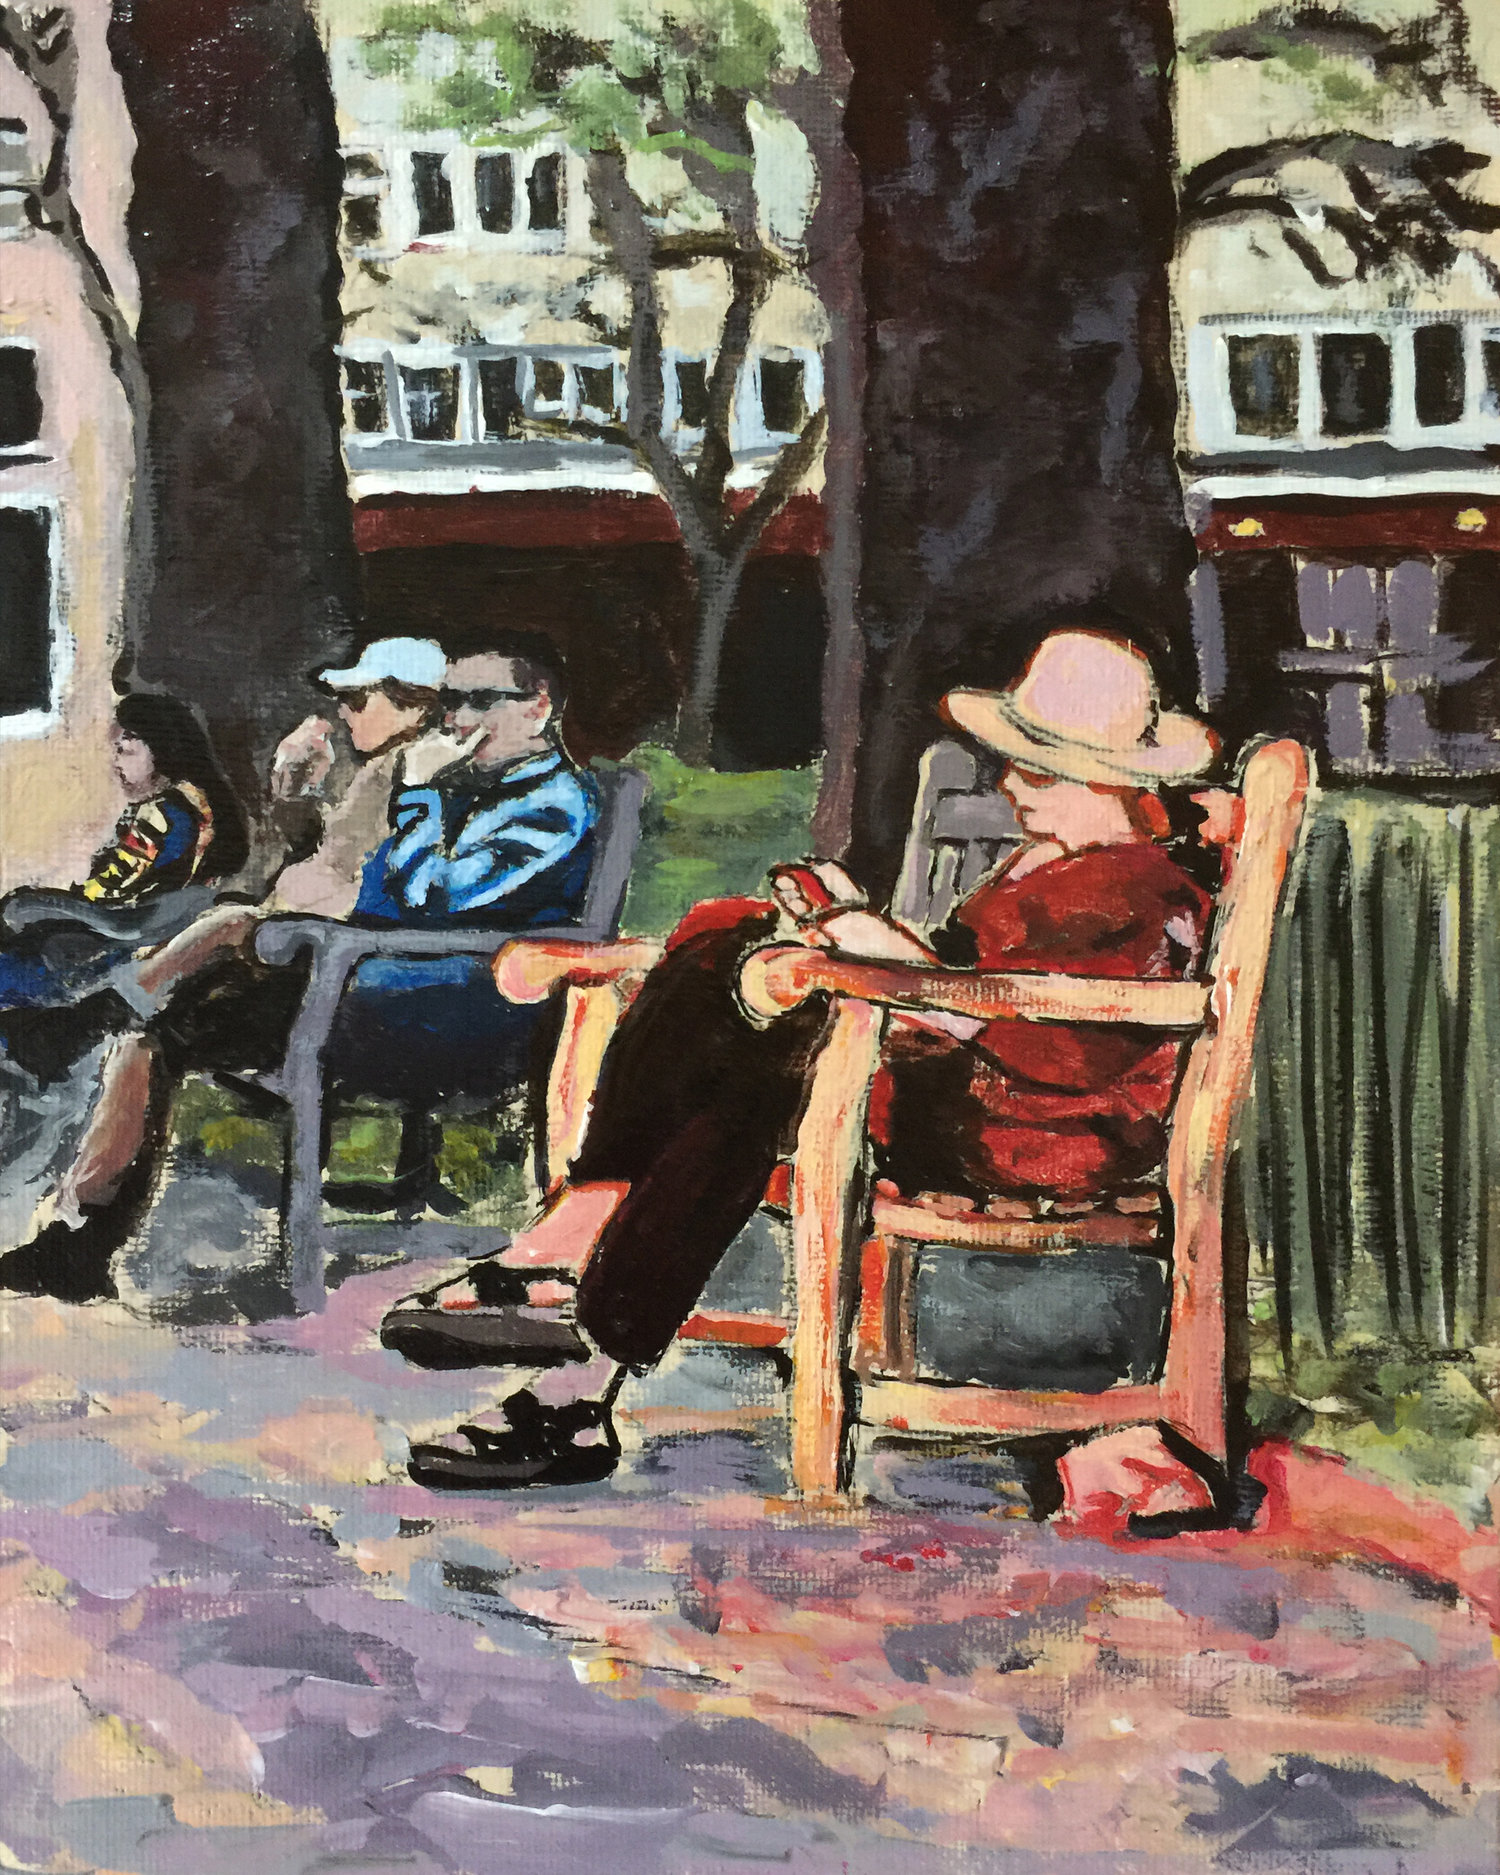 Dusk at Rittenhouse Square - 8x10 inches - Acrylic on canvas panel —  Christina Tarkoff Oil Paintings